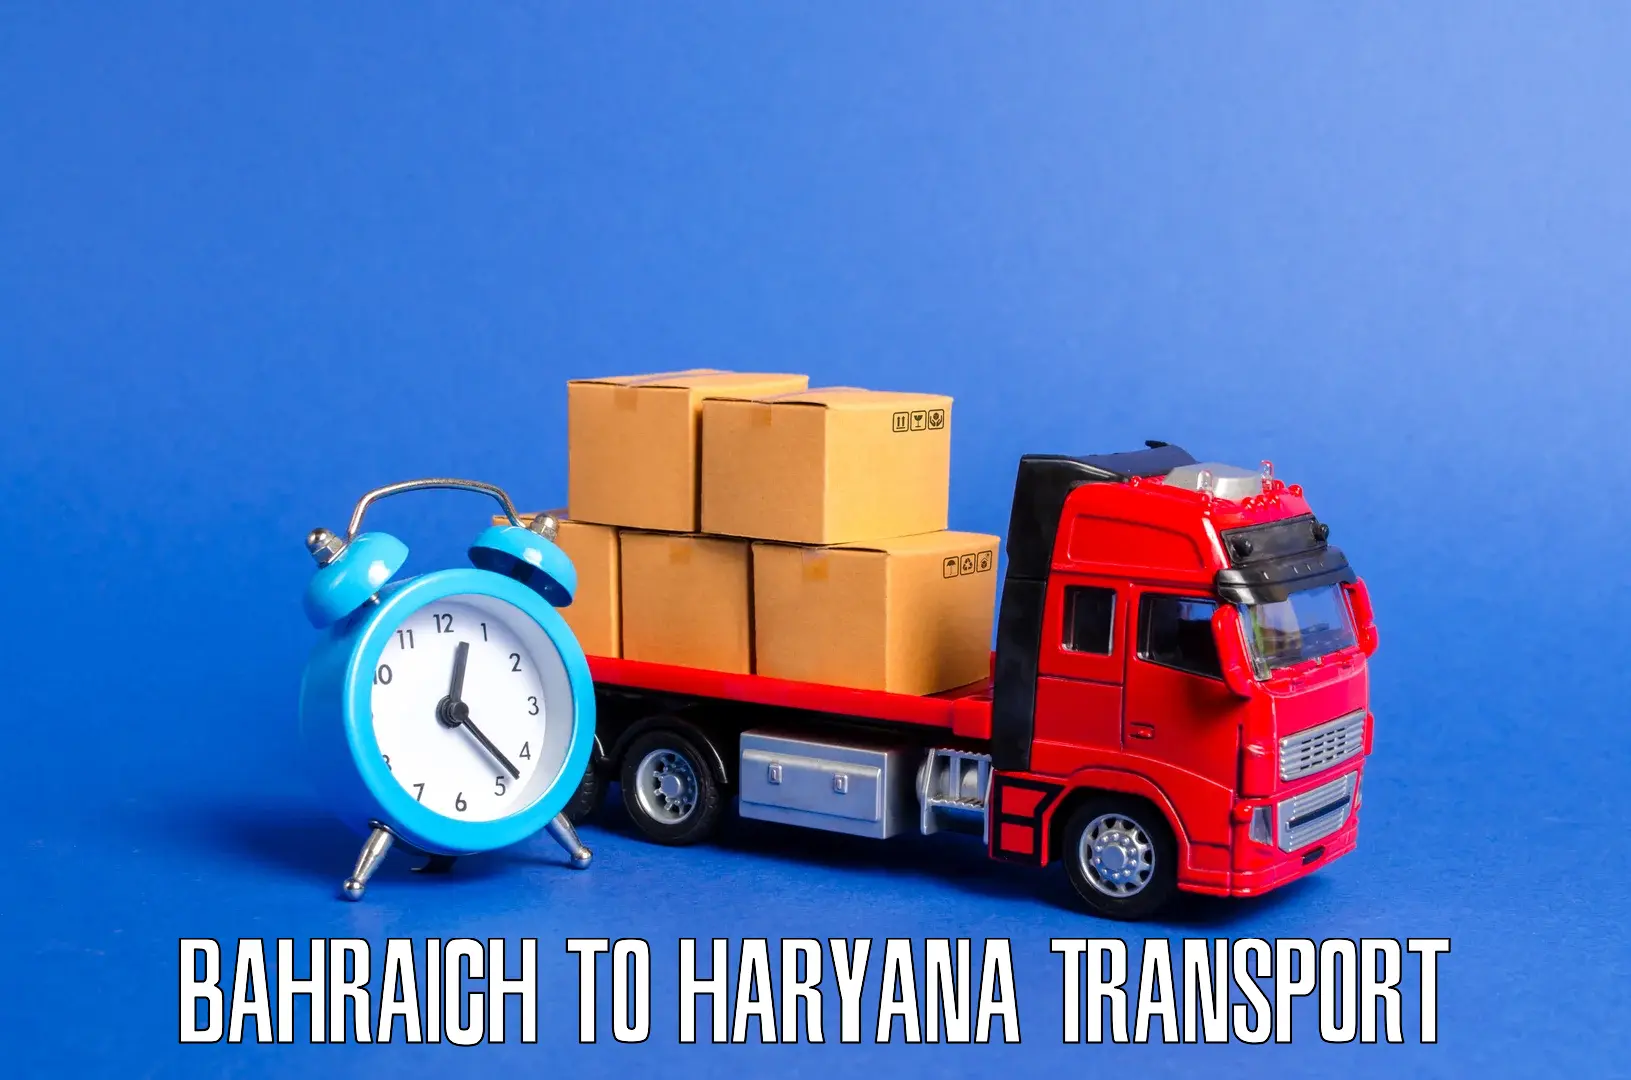 Land transport services Bahraich to Fatehabad